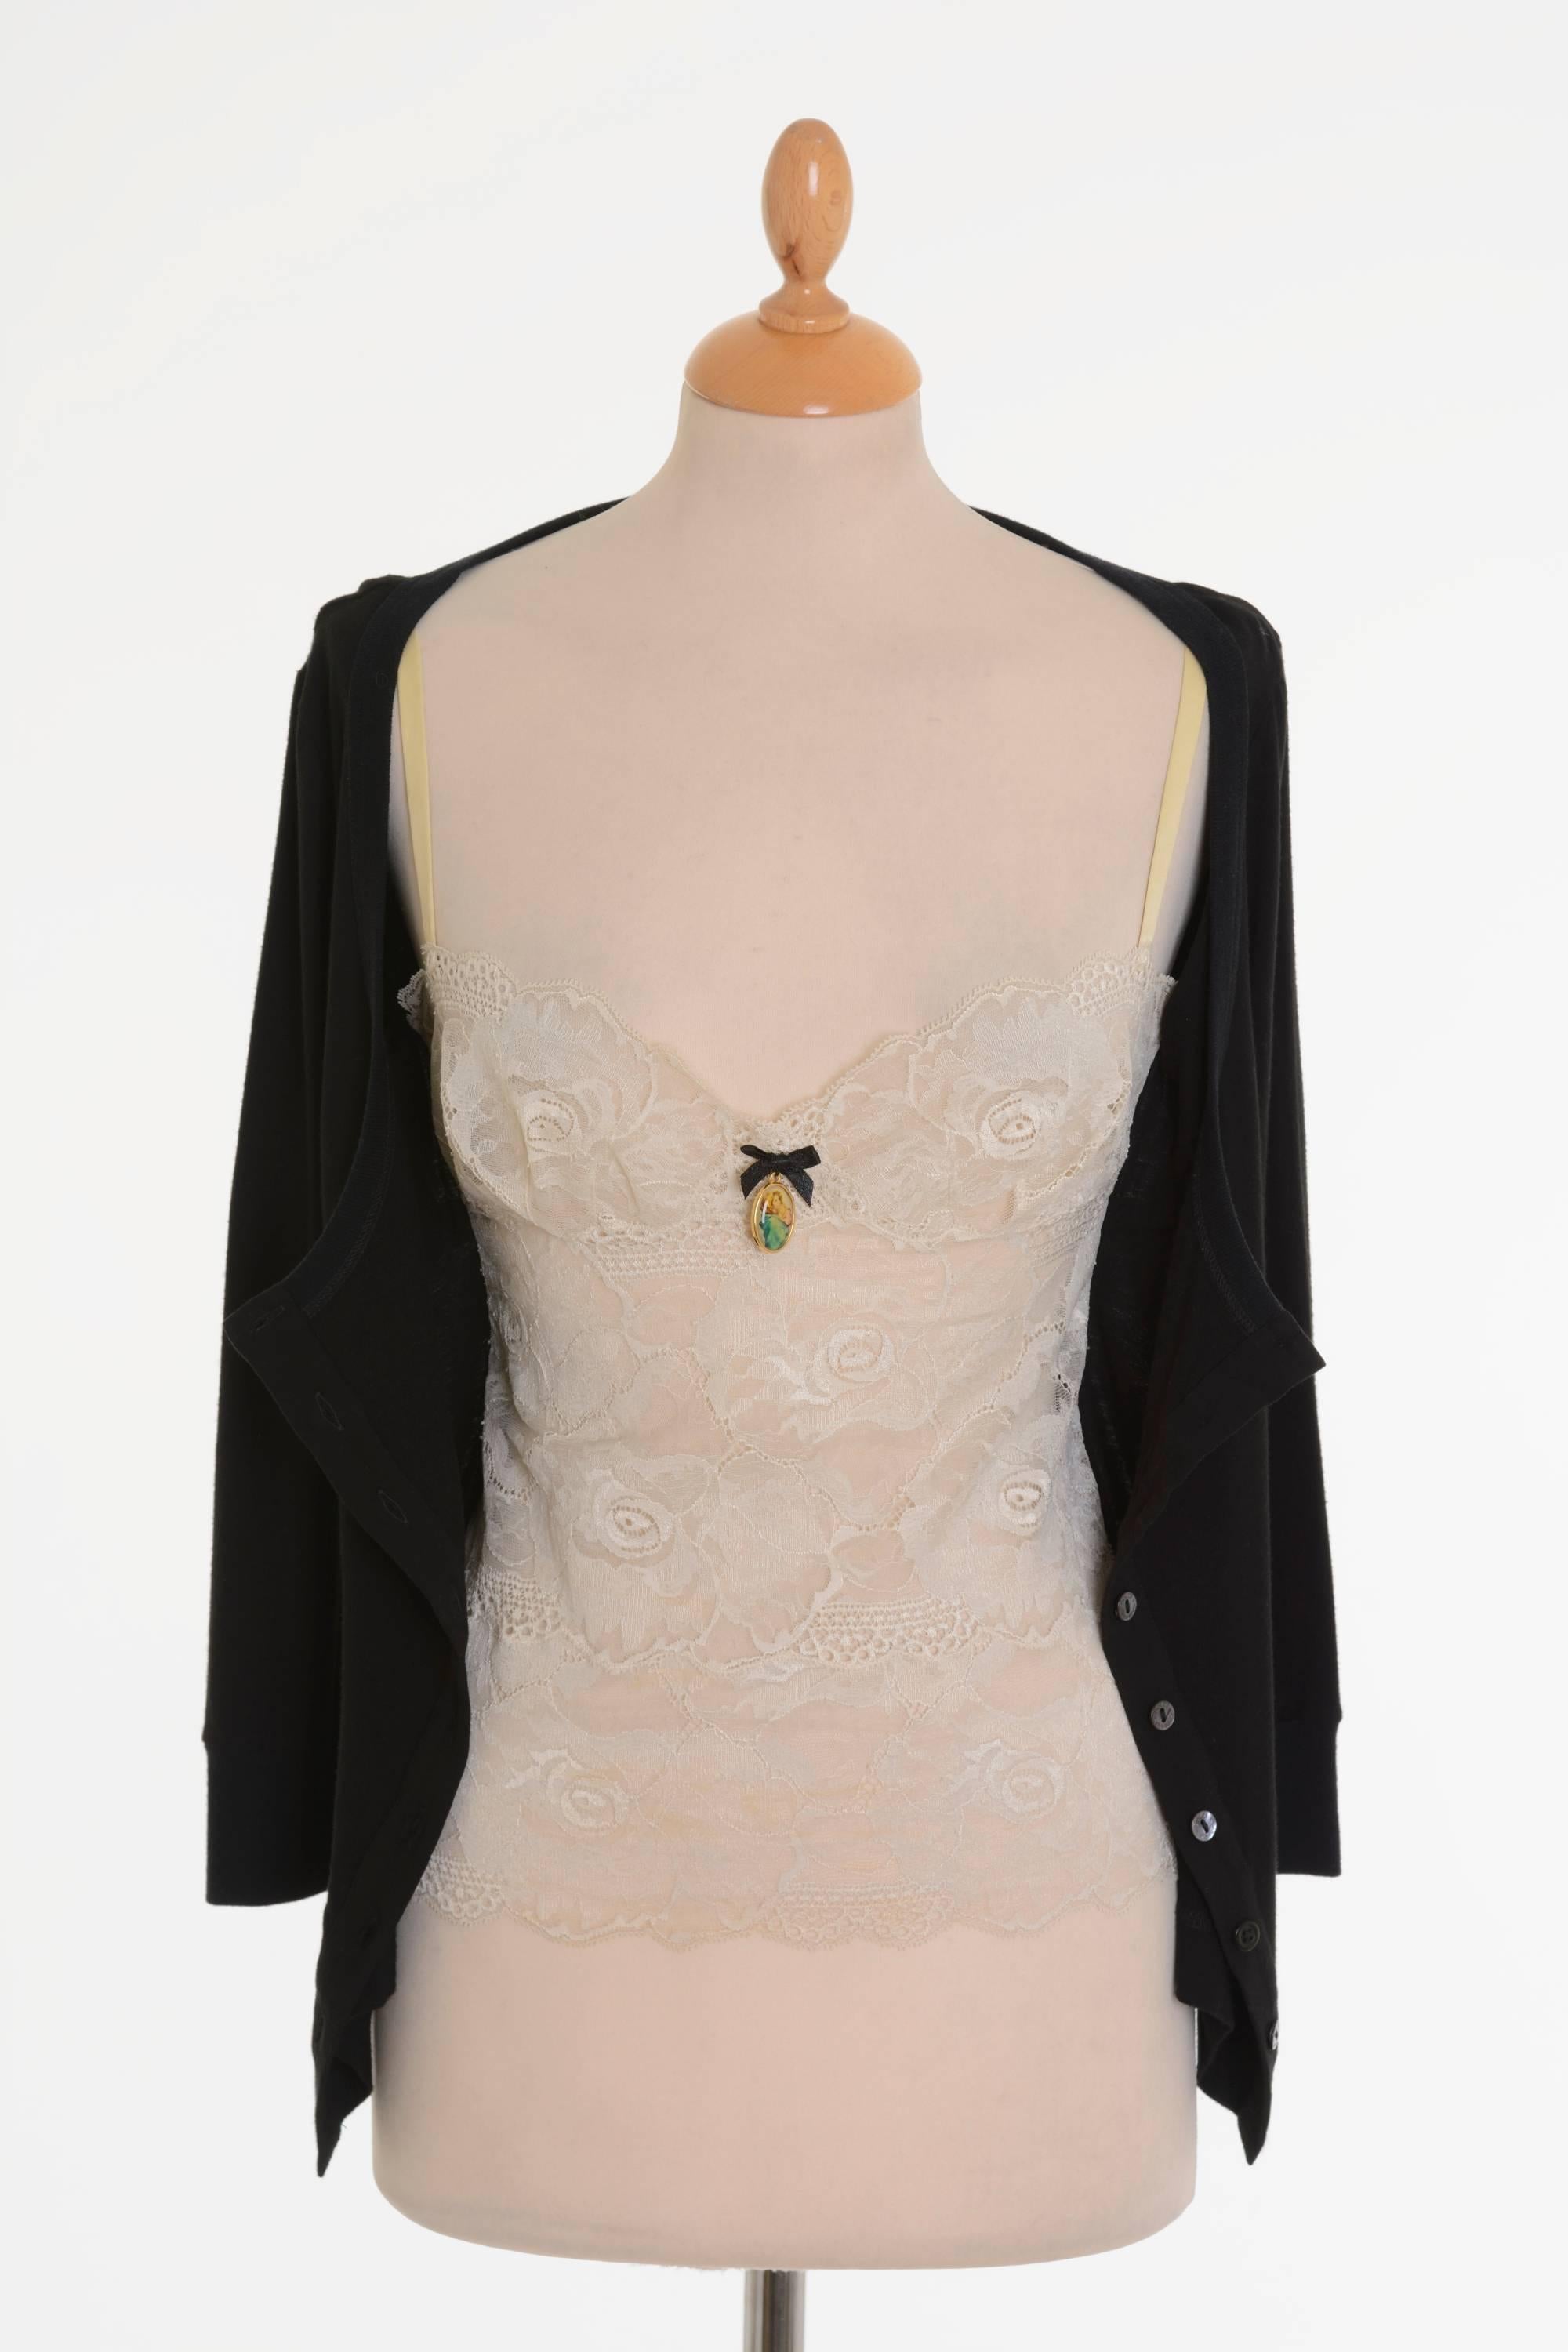 Dolce & Gabbana Black T-shirt Cardigan with Cream Lace Tank Top In Excellent Condition For Sale In Milan, Italy